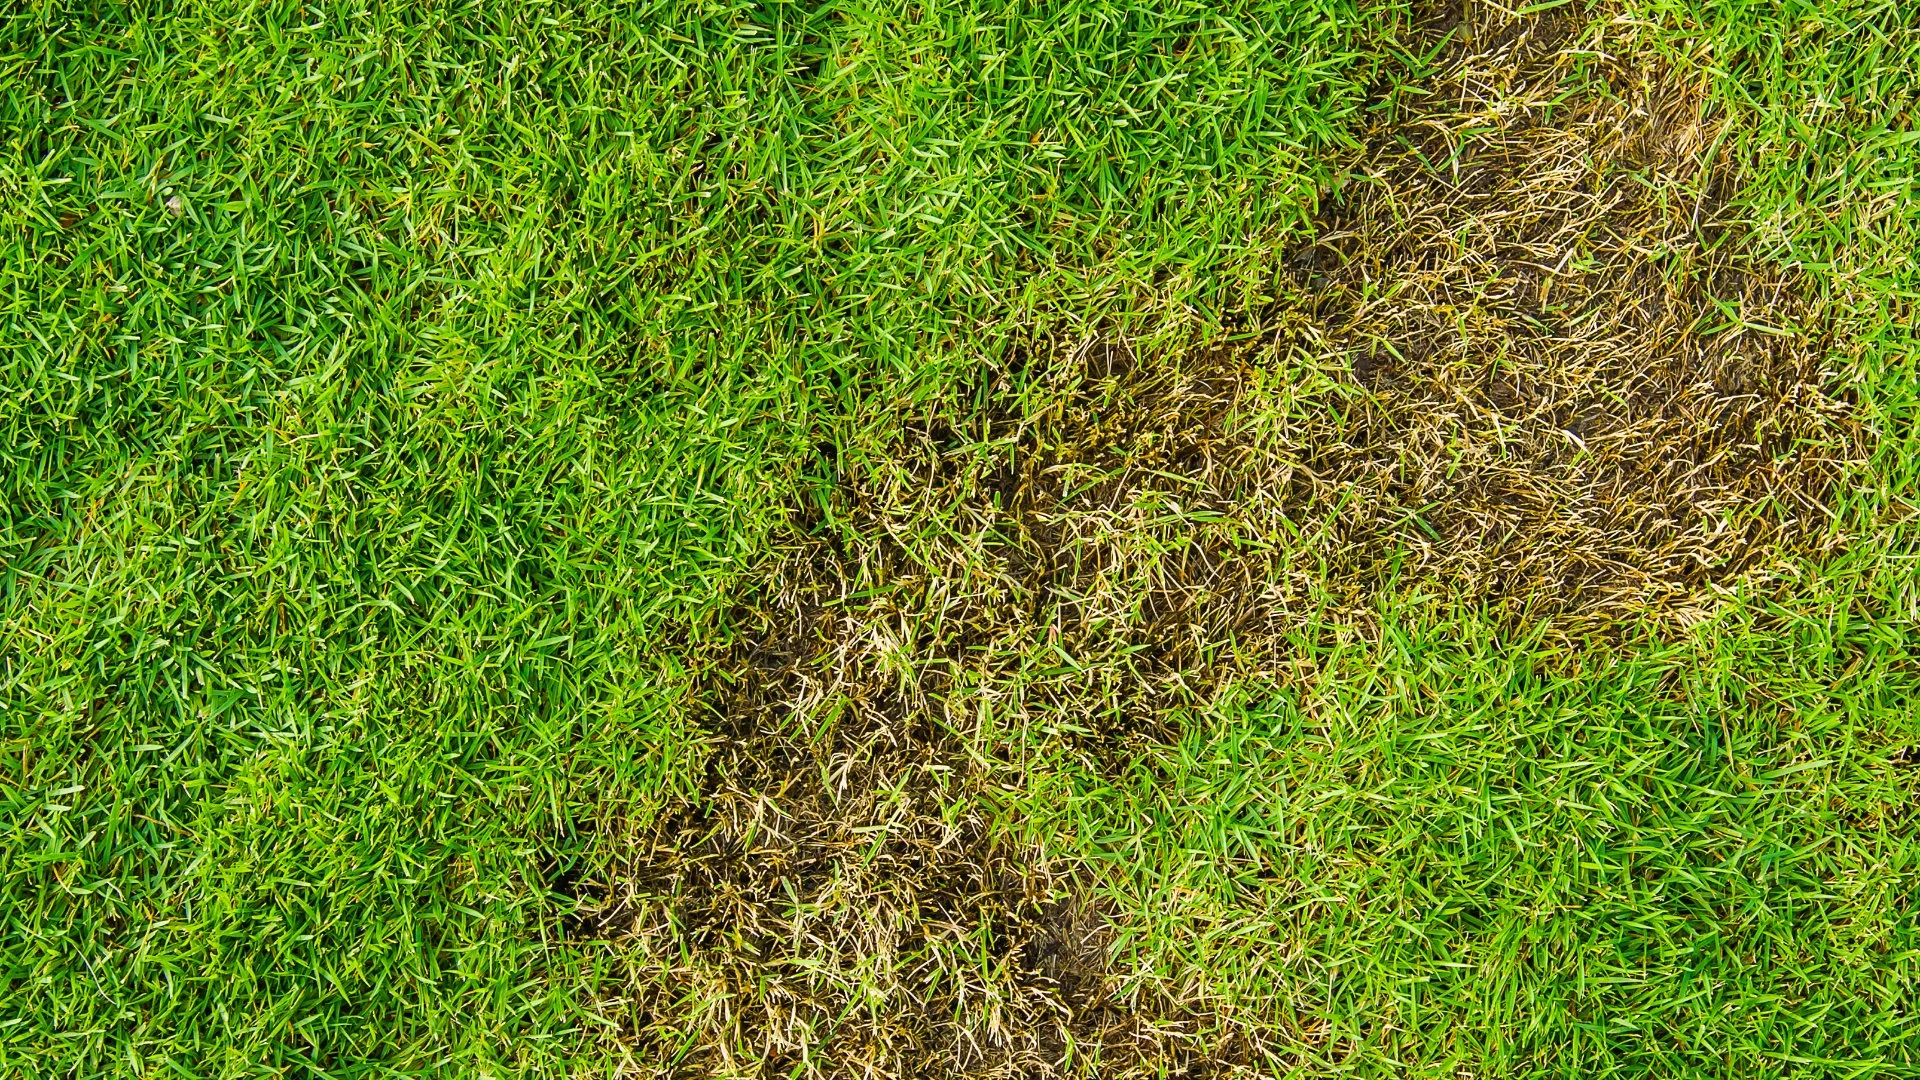 Grubs or Armyworms - Which of These Pests is Destroying Your Lawn?